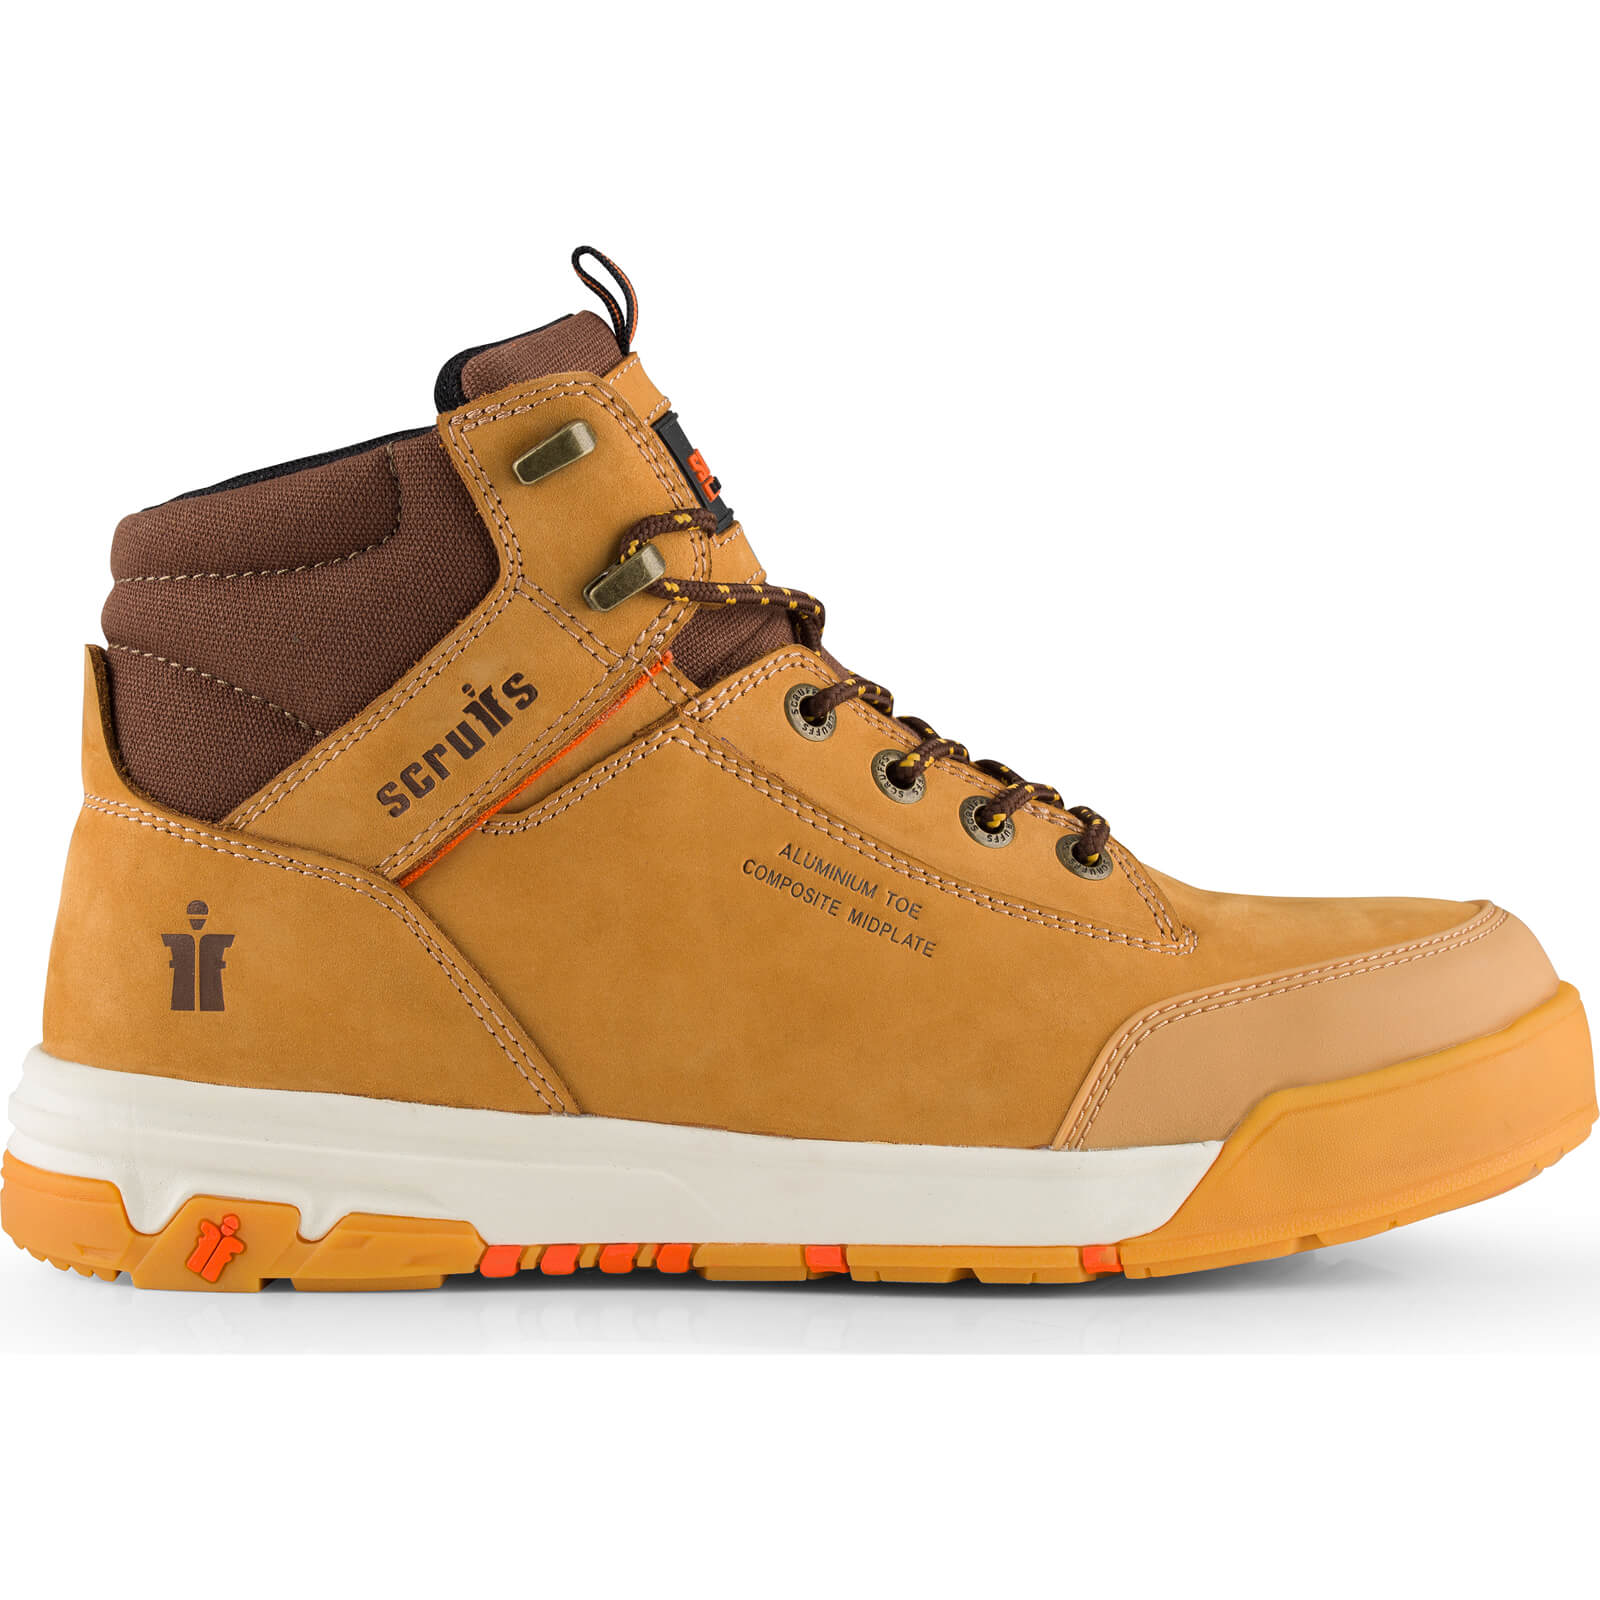 Image of Scruffs Switchback 3 Work Boot Tan Size 7